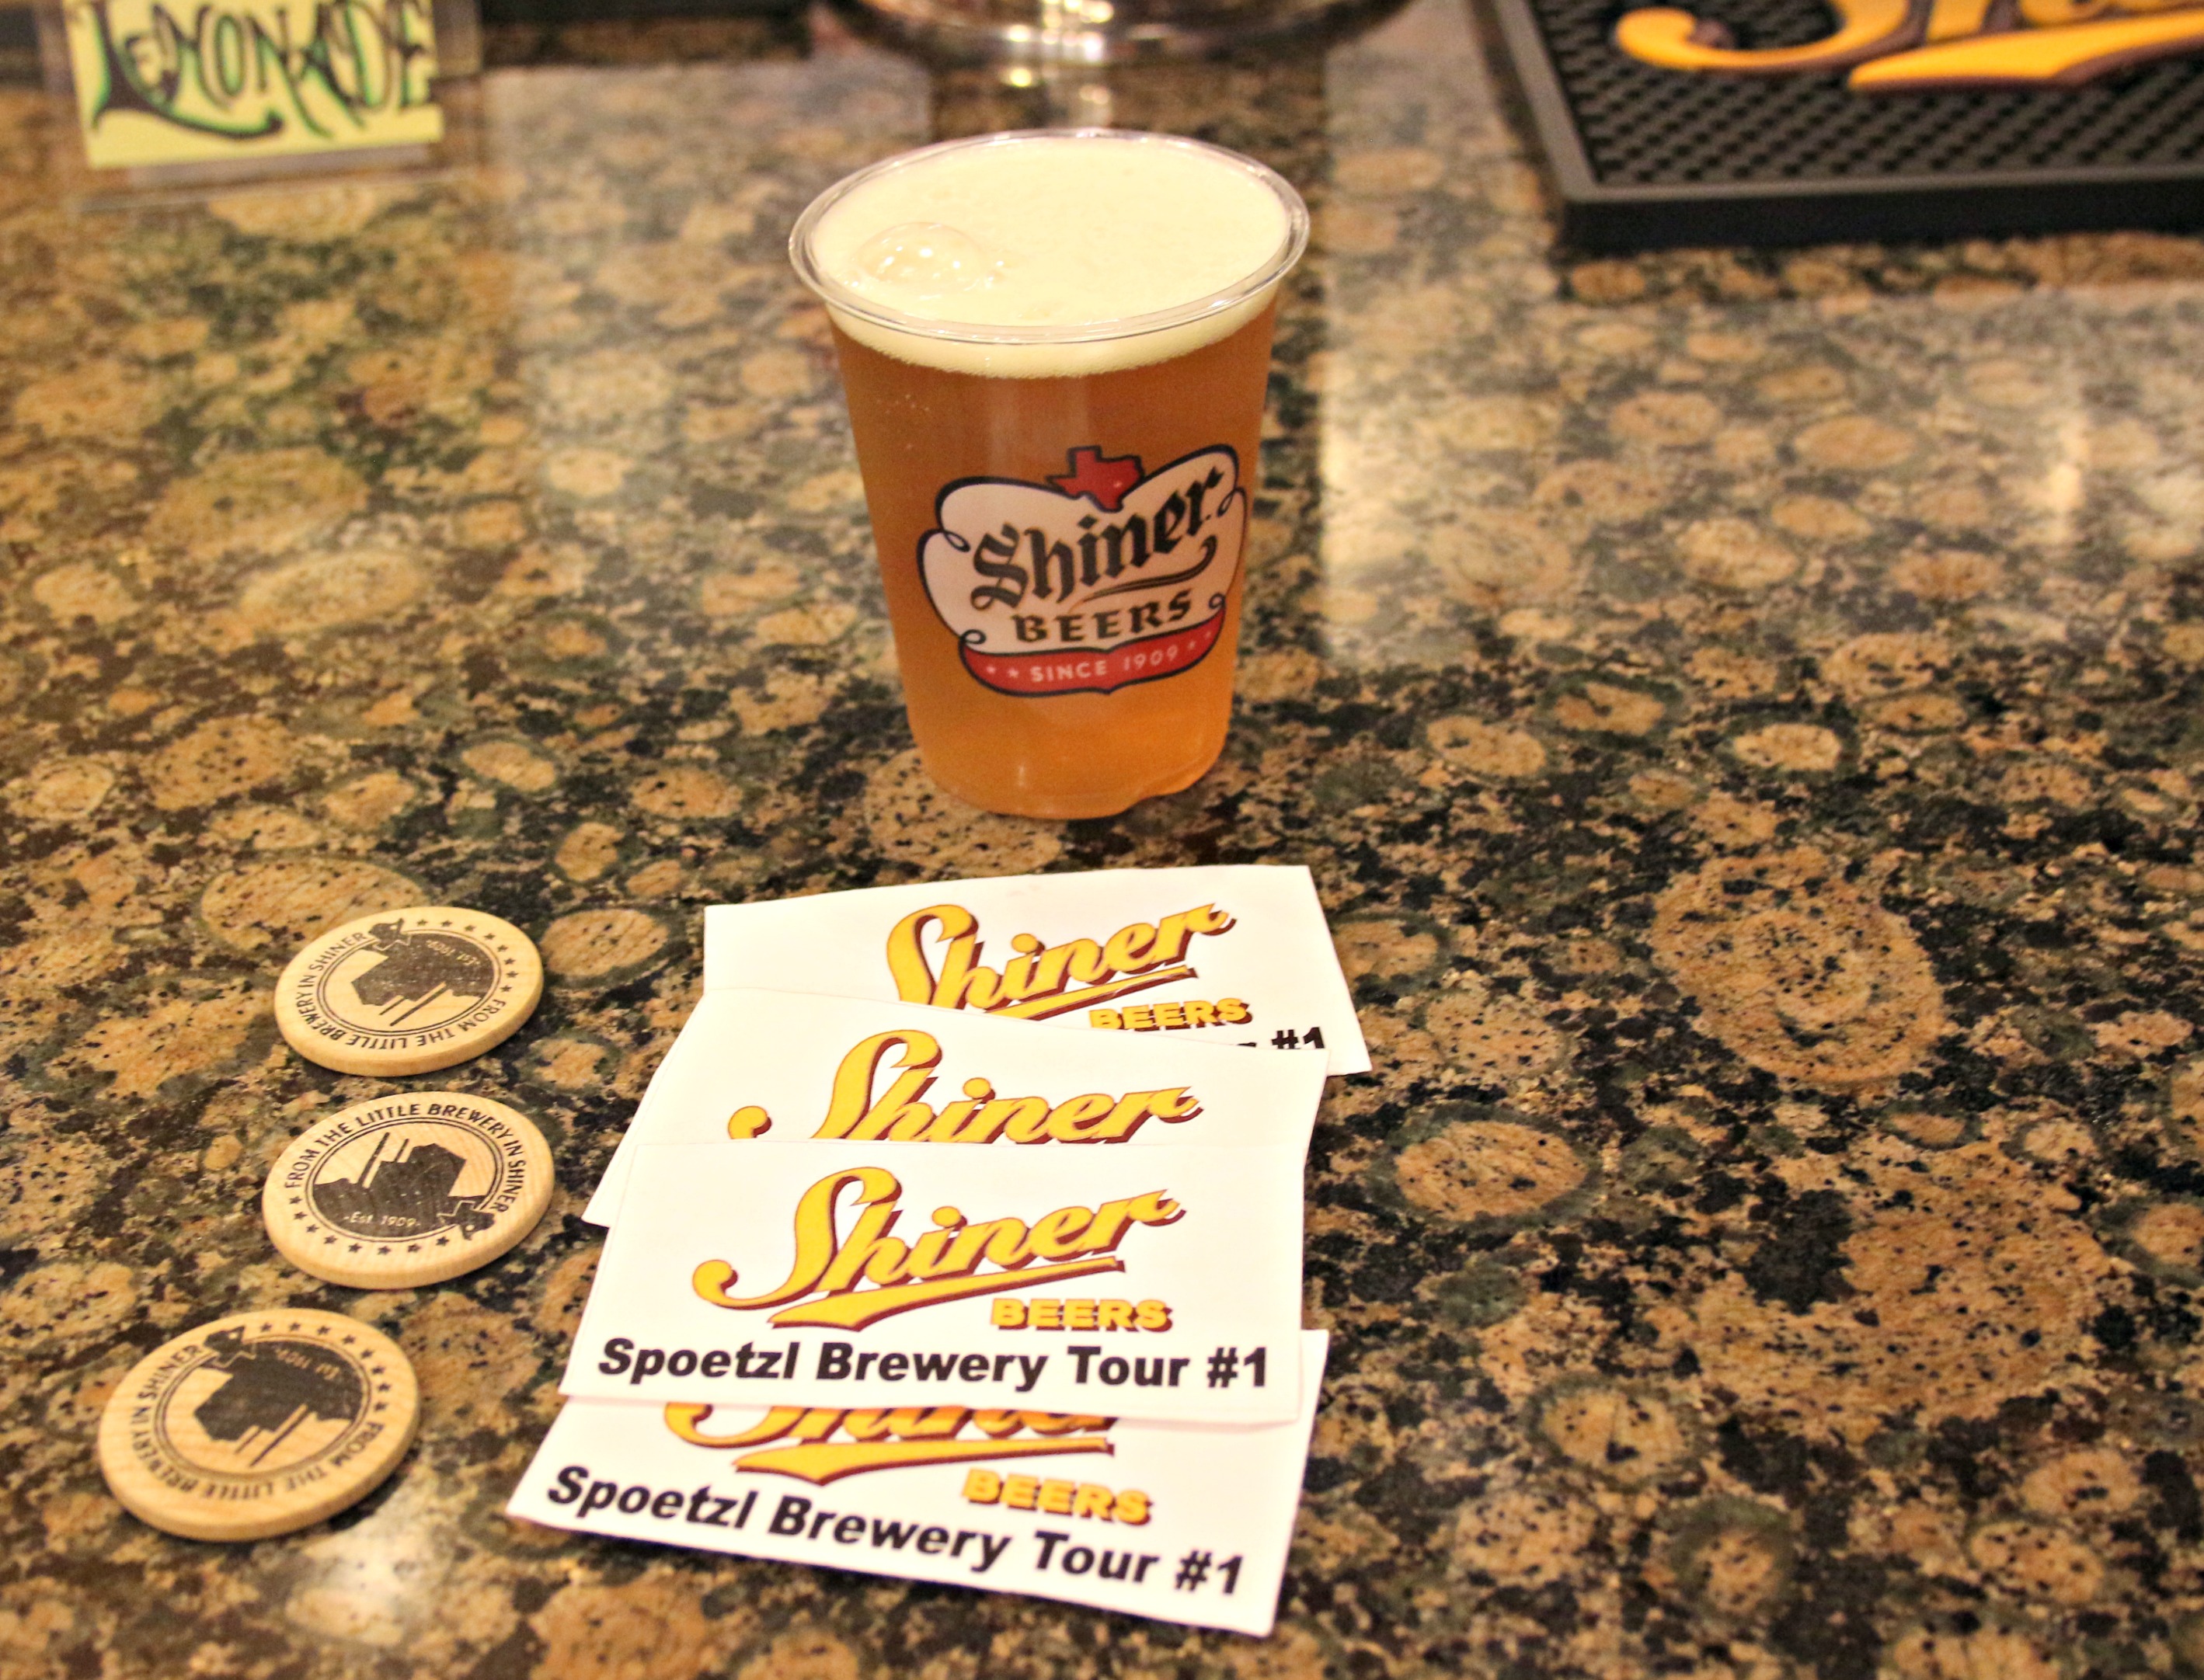 Visiting Shiner Texas - What to do and where to stay|Ripped Jeans and Bifocals